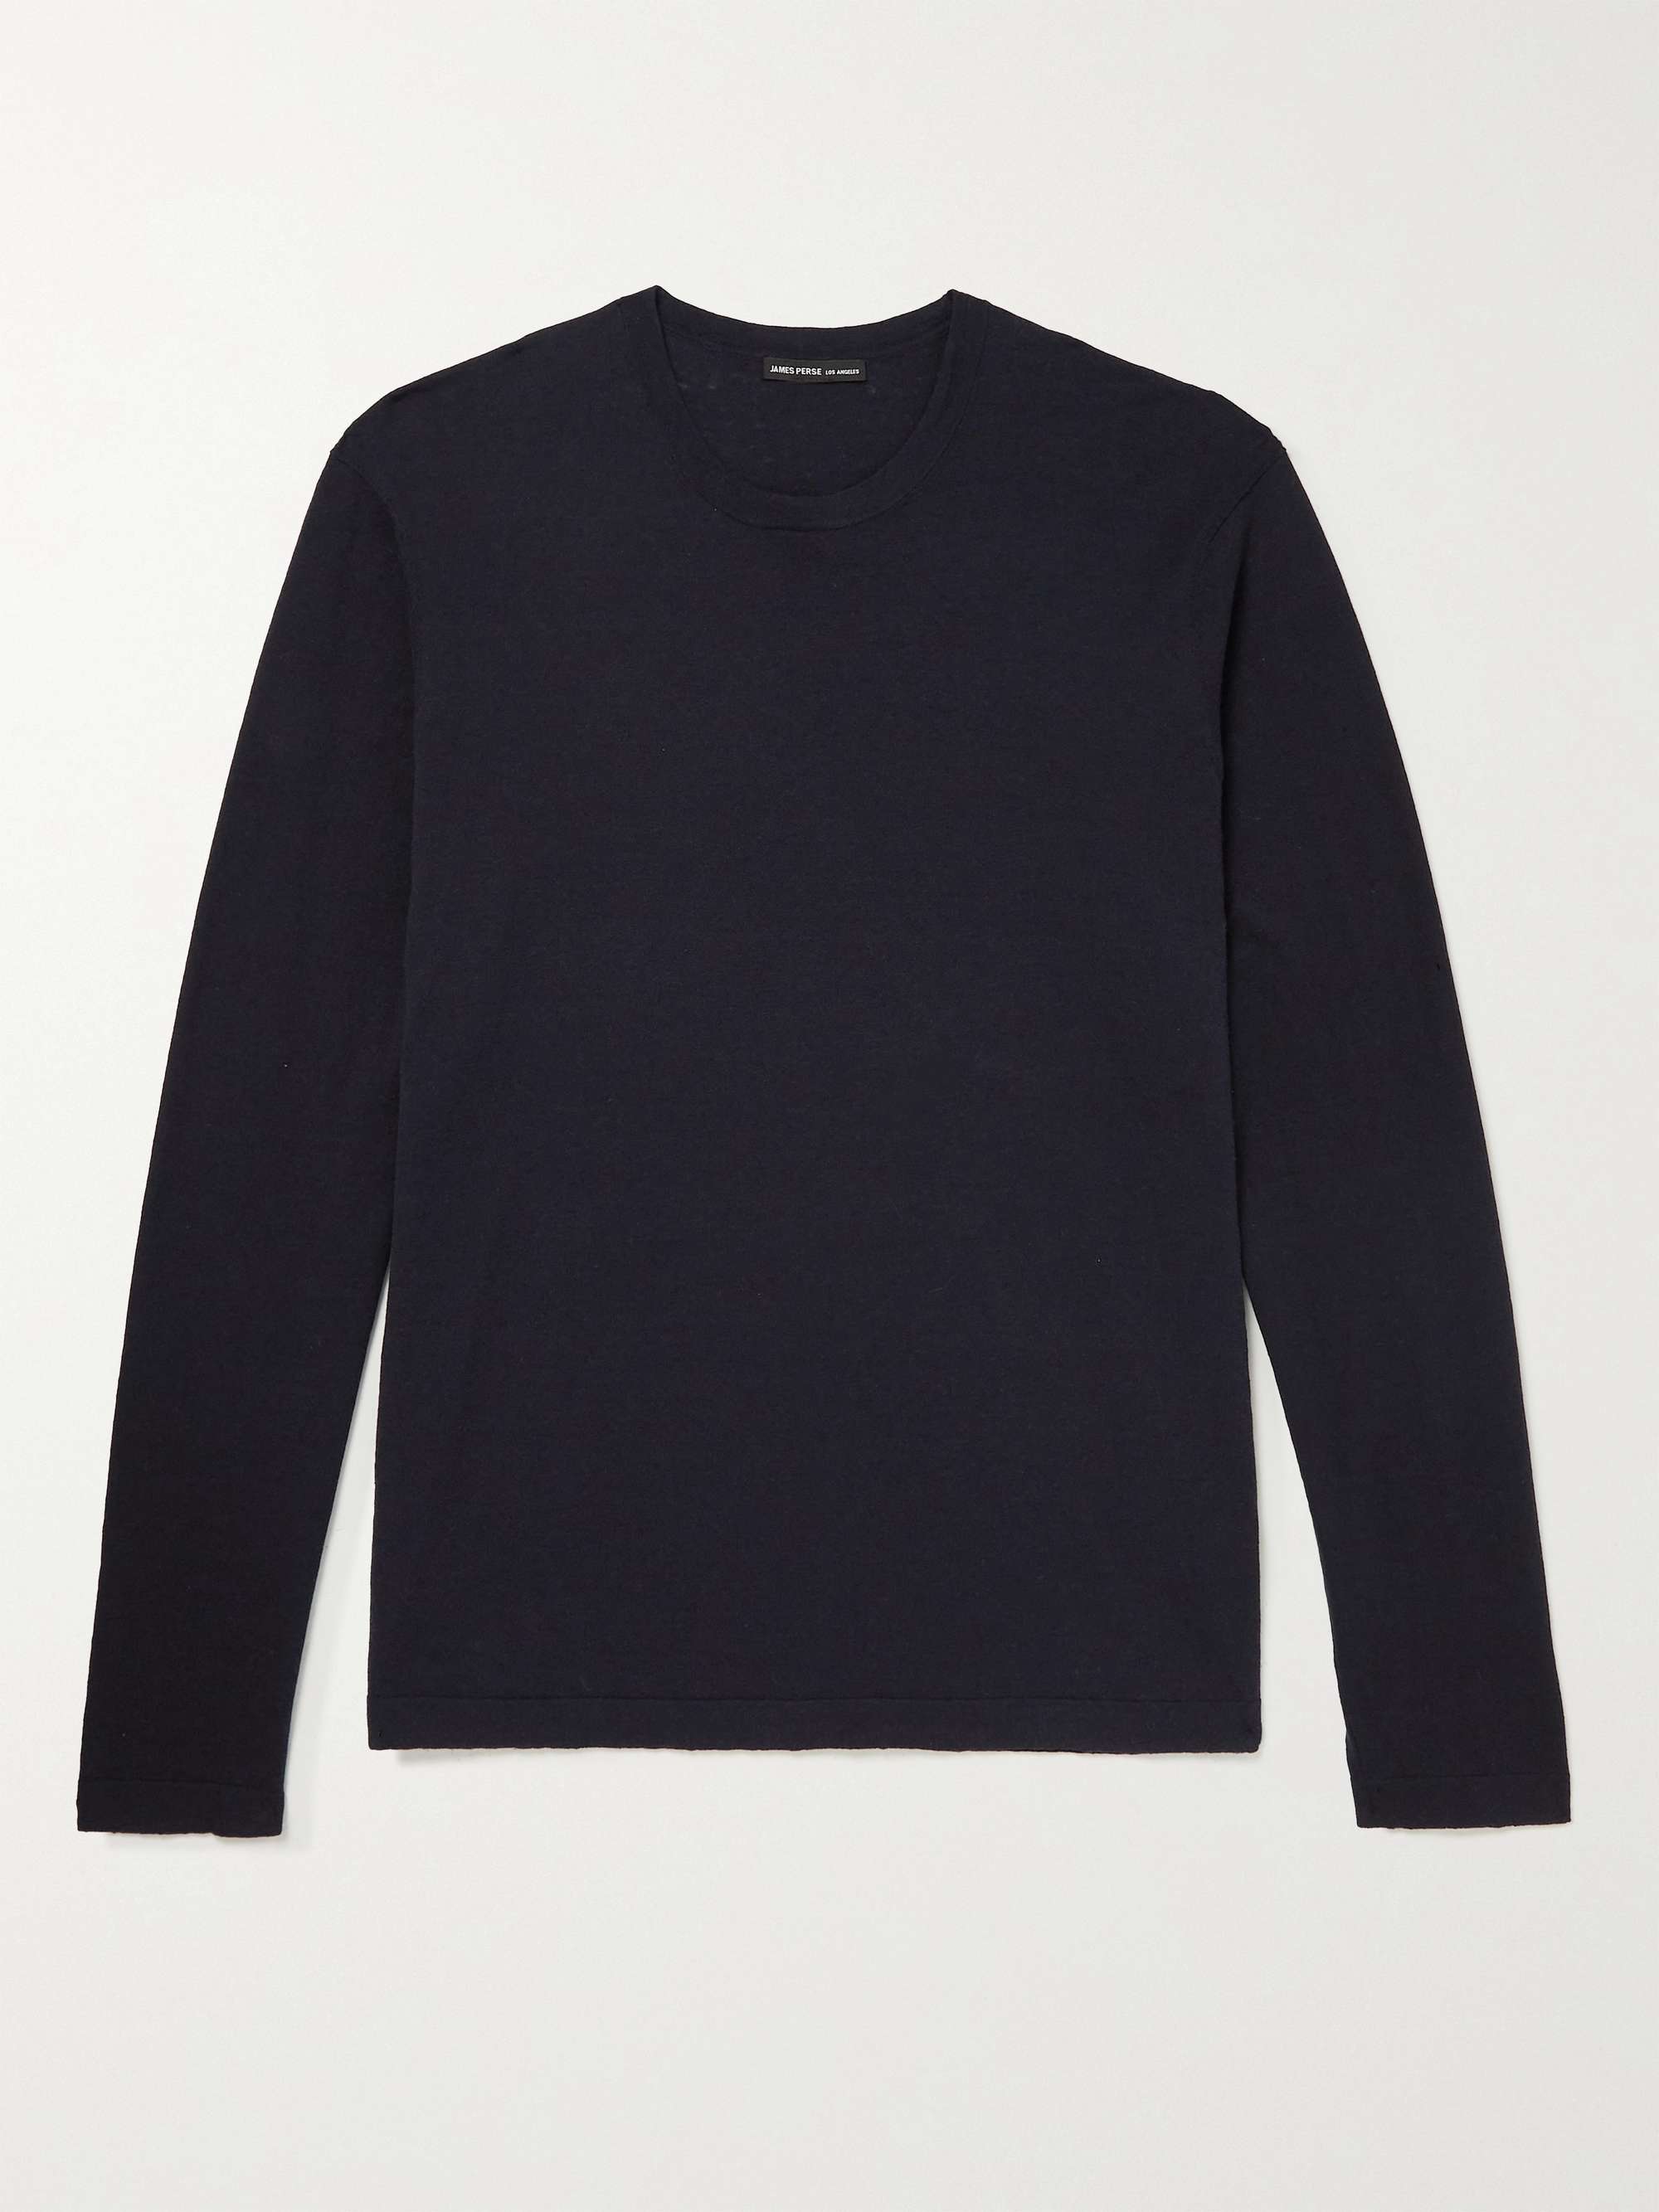 JAMES PERSE Slim-Fit Recycled Cotton Sweater for Men | MR PORTER